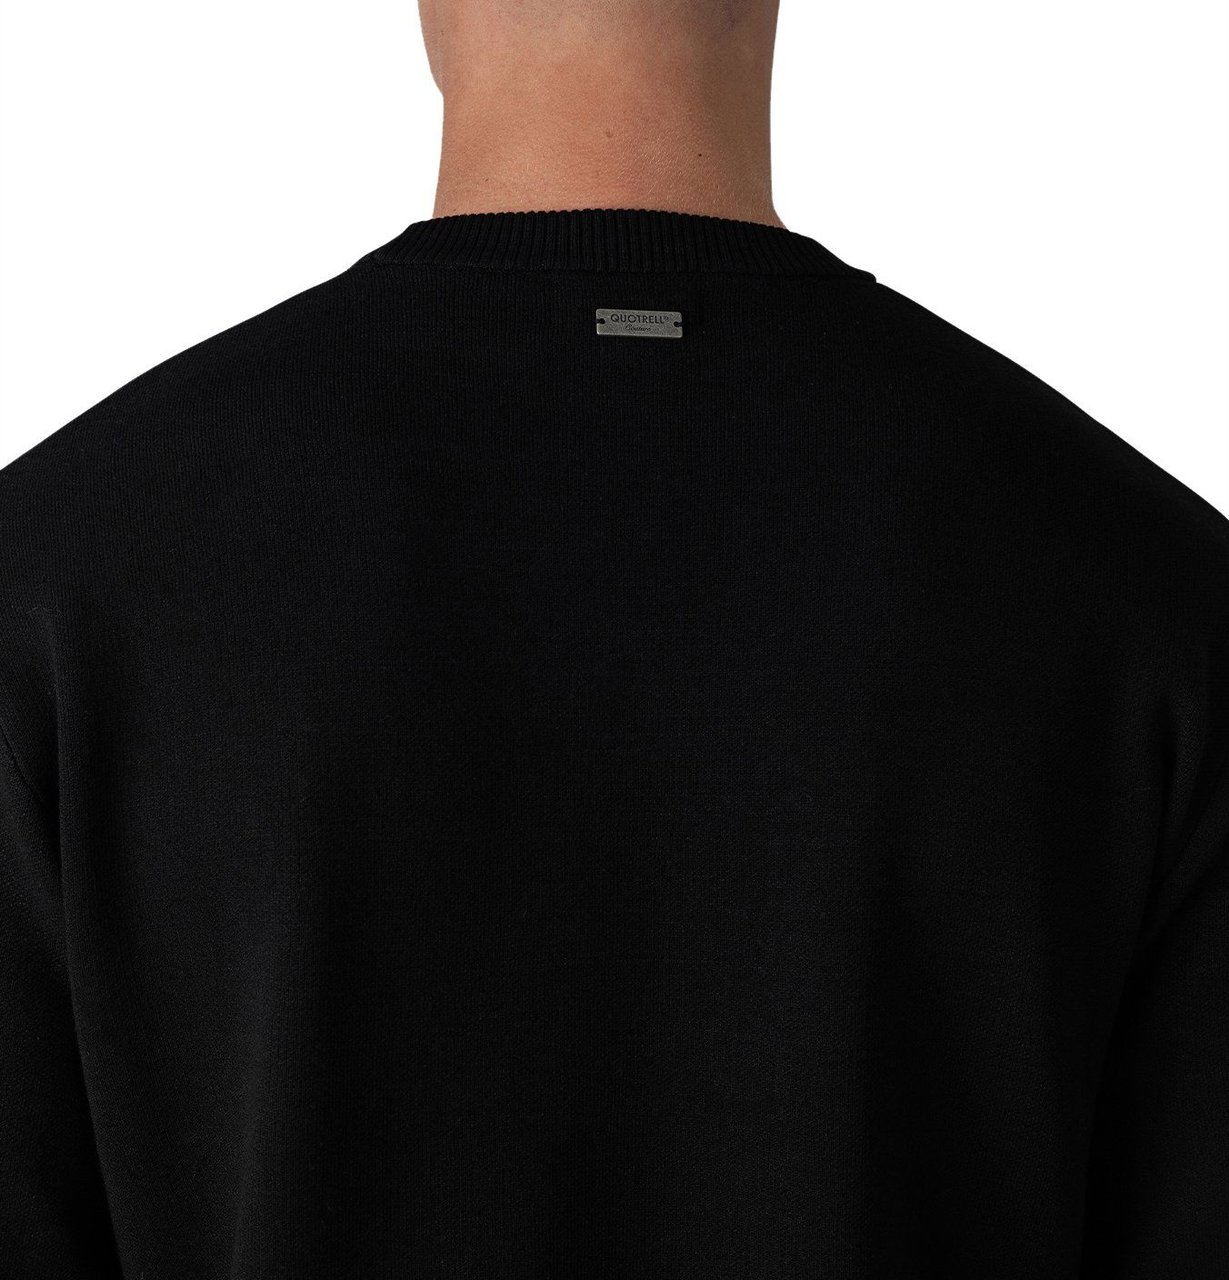 Quotrell Quotrell Couture - Salvador Knitted Crewneck | Black/white Zwart